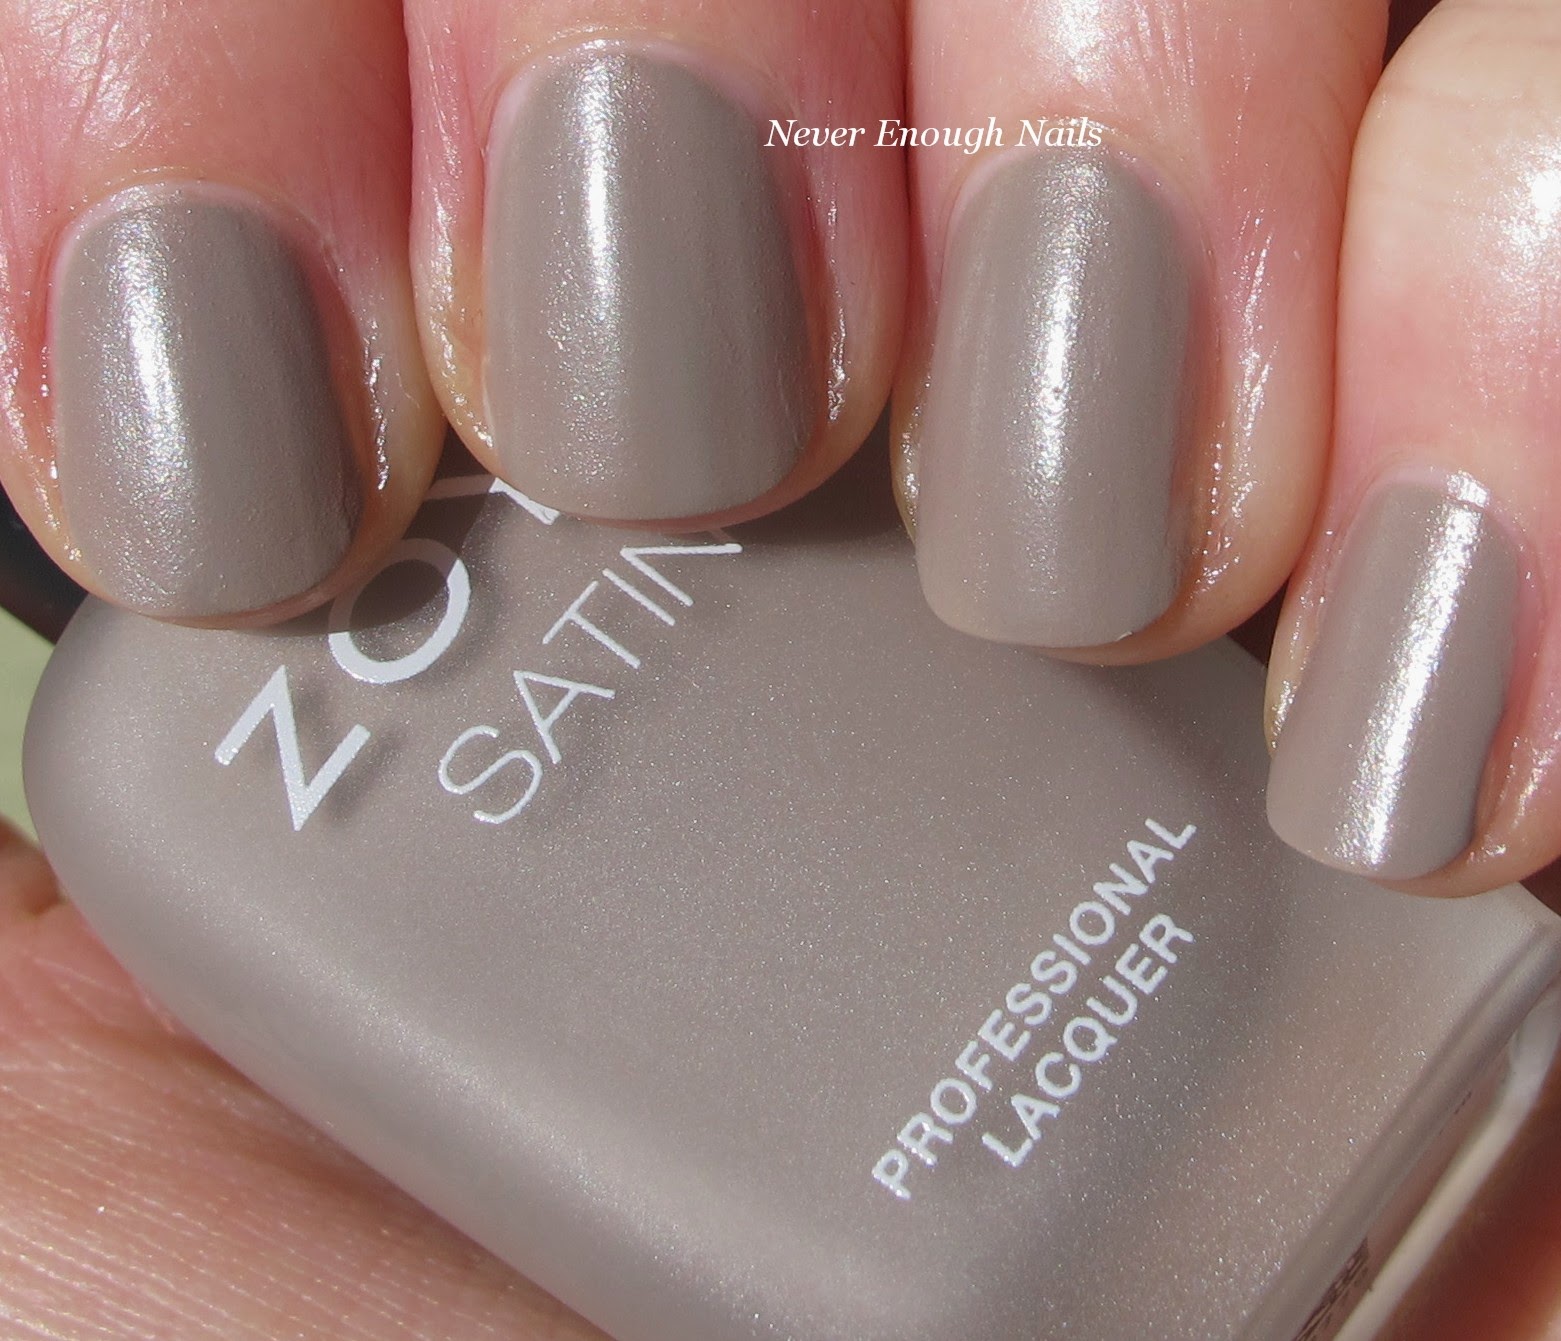 Swatch and Review: Zoya Satins Brittany and Ana (and a peak at the Satin  top coat!) – The Polish Swatcher